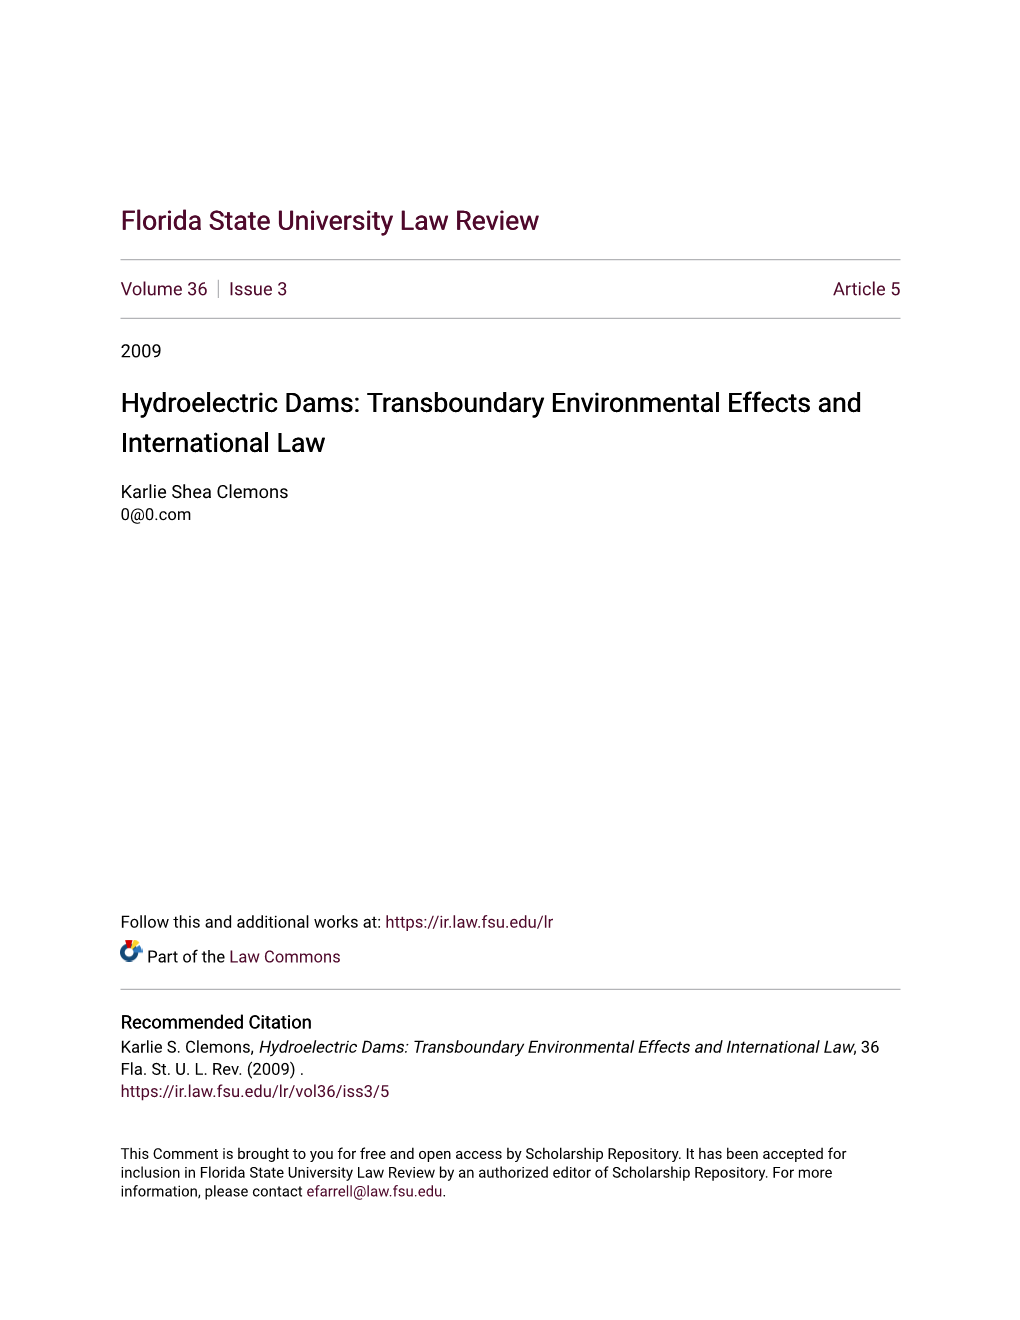 Transboundary Environmental Effects and International Law